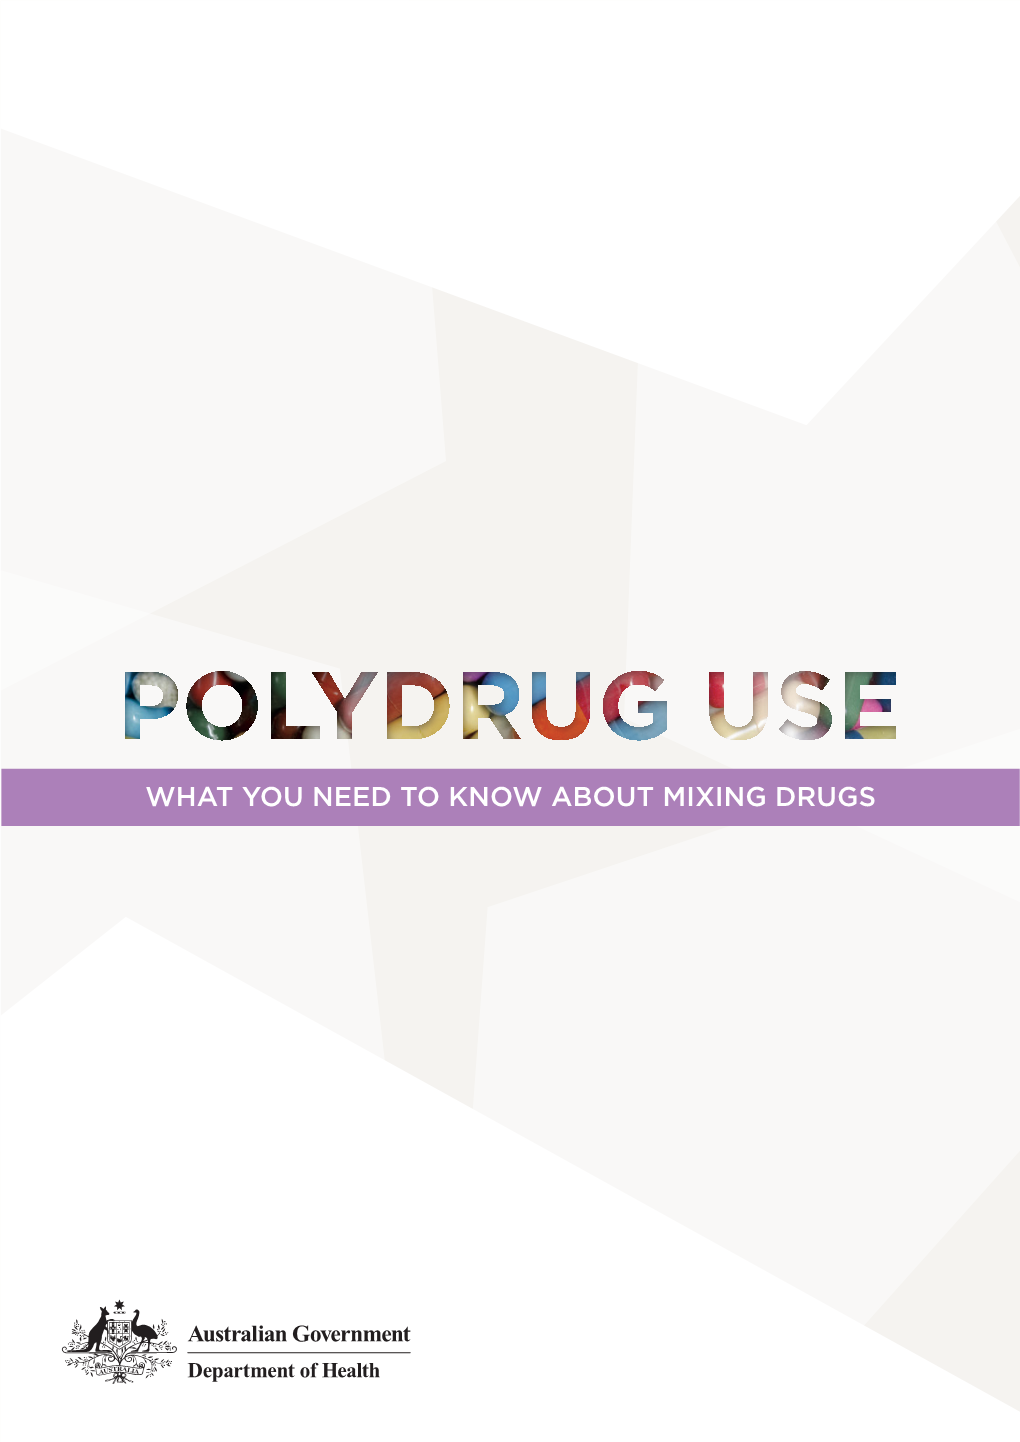 What You Need to Know About Mixing Drugs What Is Polydrug Use?